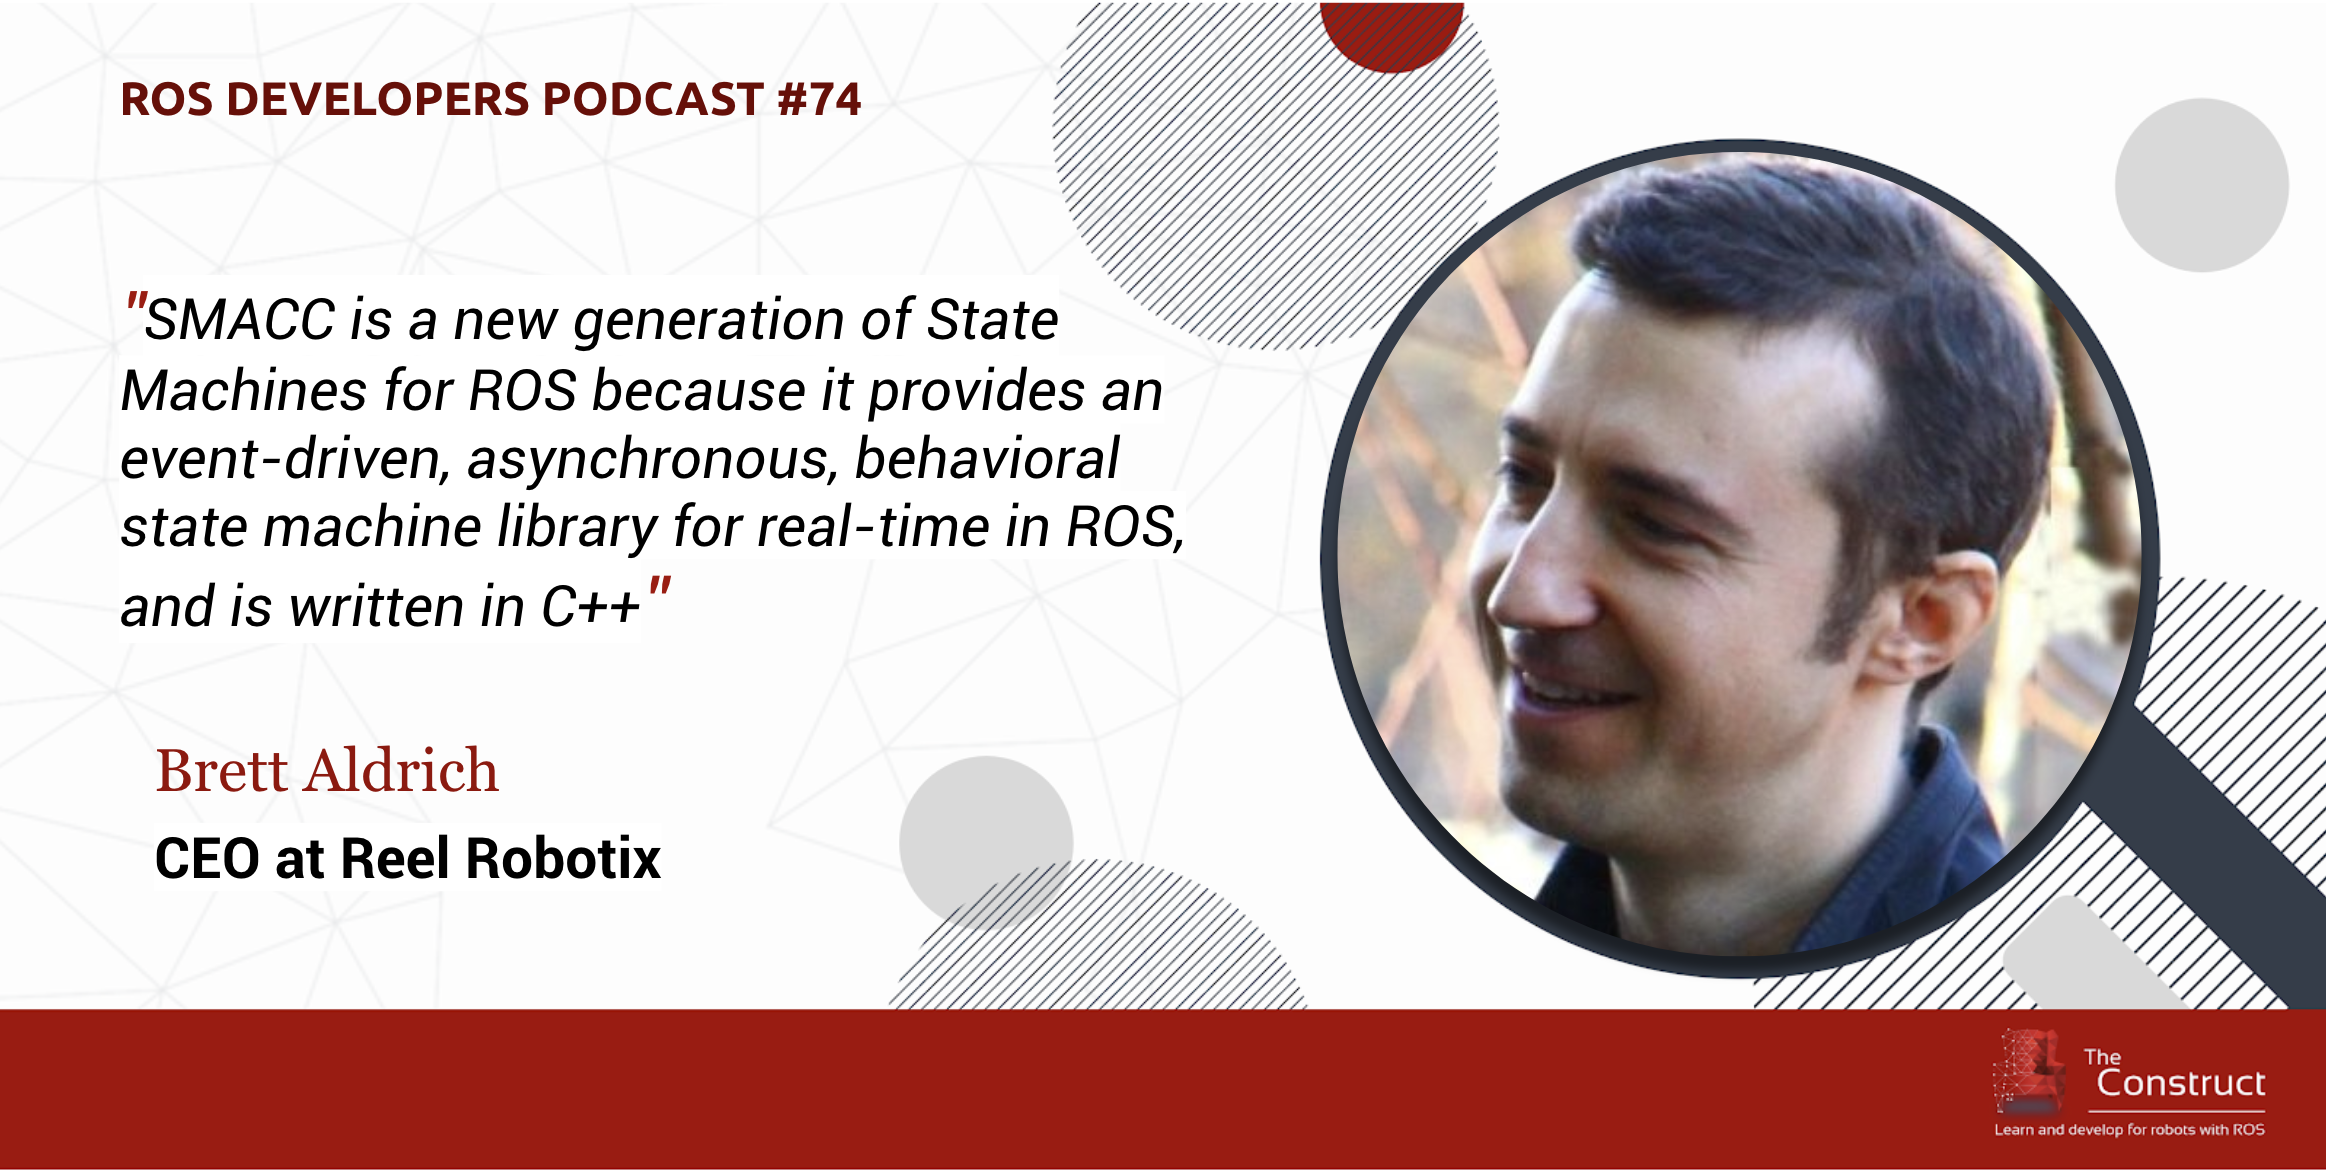 The new generation of State Machines for ROS with Brett Aldrich